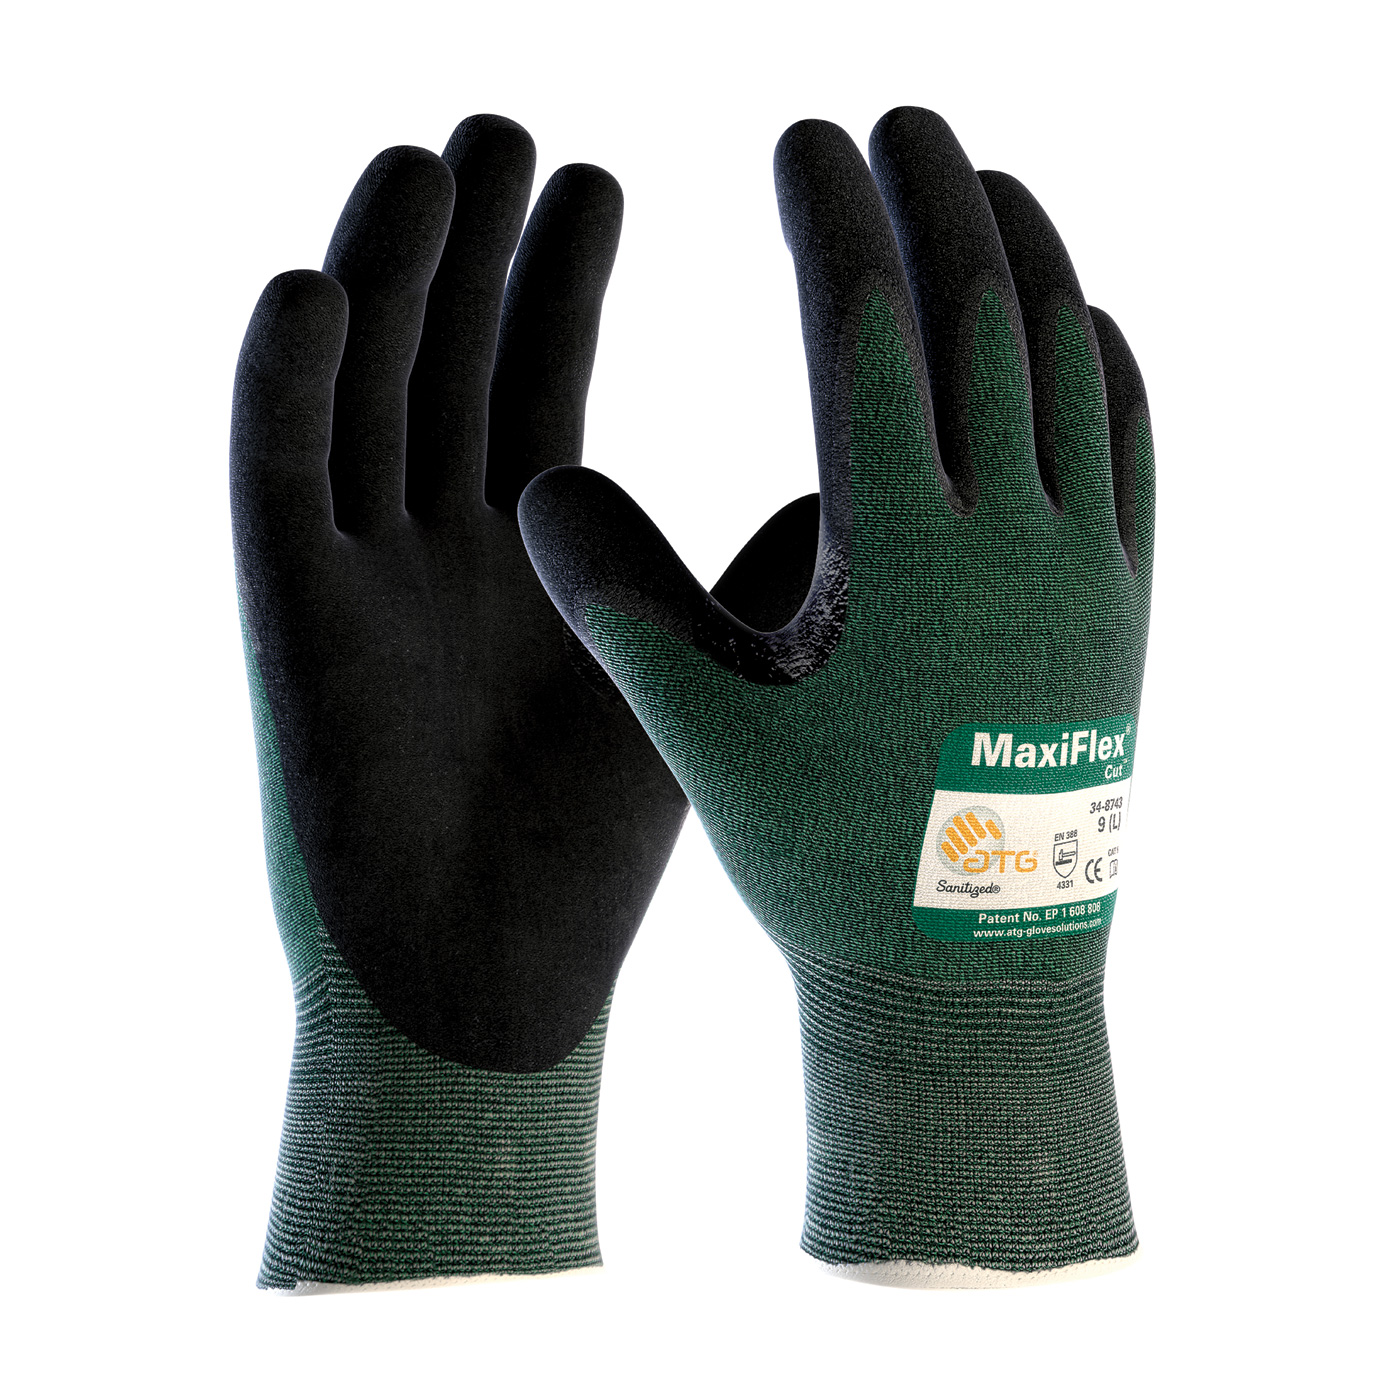 PIP 34-8743/L MaxiFlex Cut Seamless Knit Engineered Yarn Glove with Premium Nitrile Coated MicroFoam Grip on Palm & Fingers - Large PID-34 8743 L